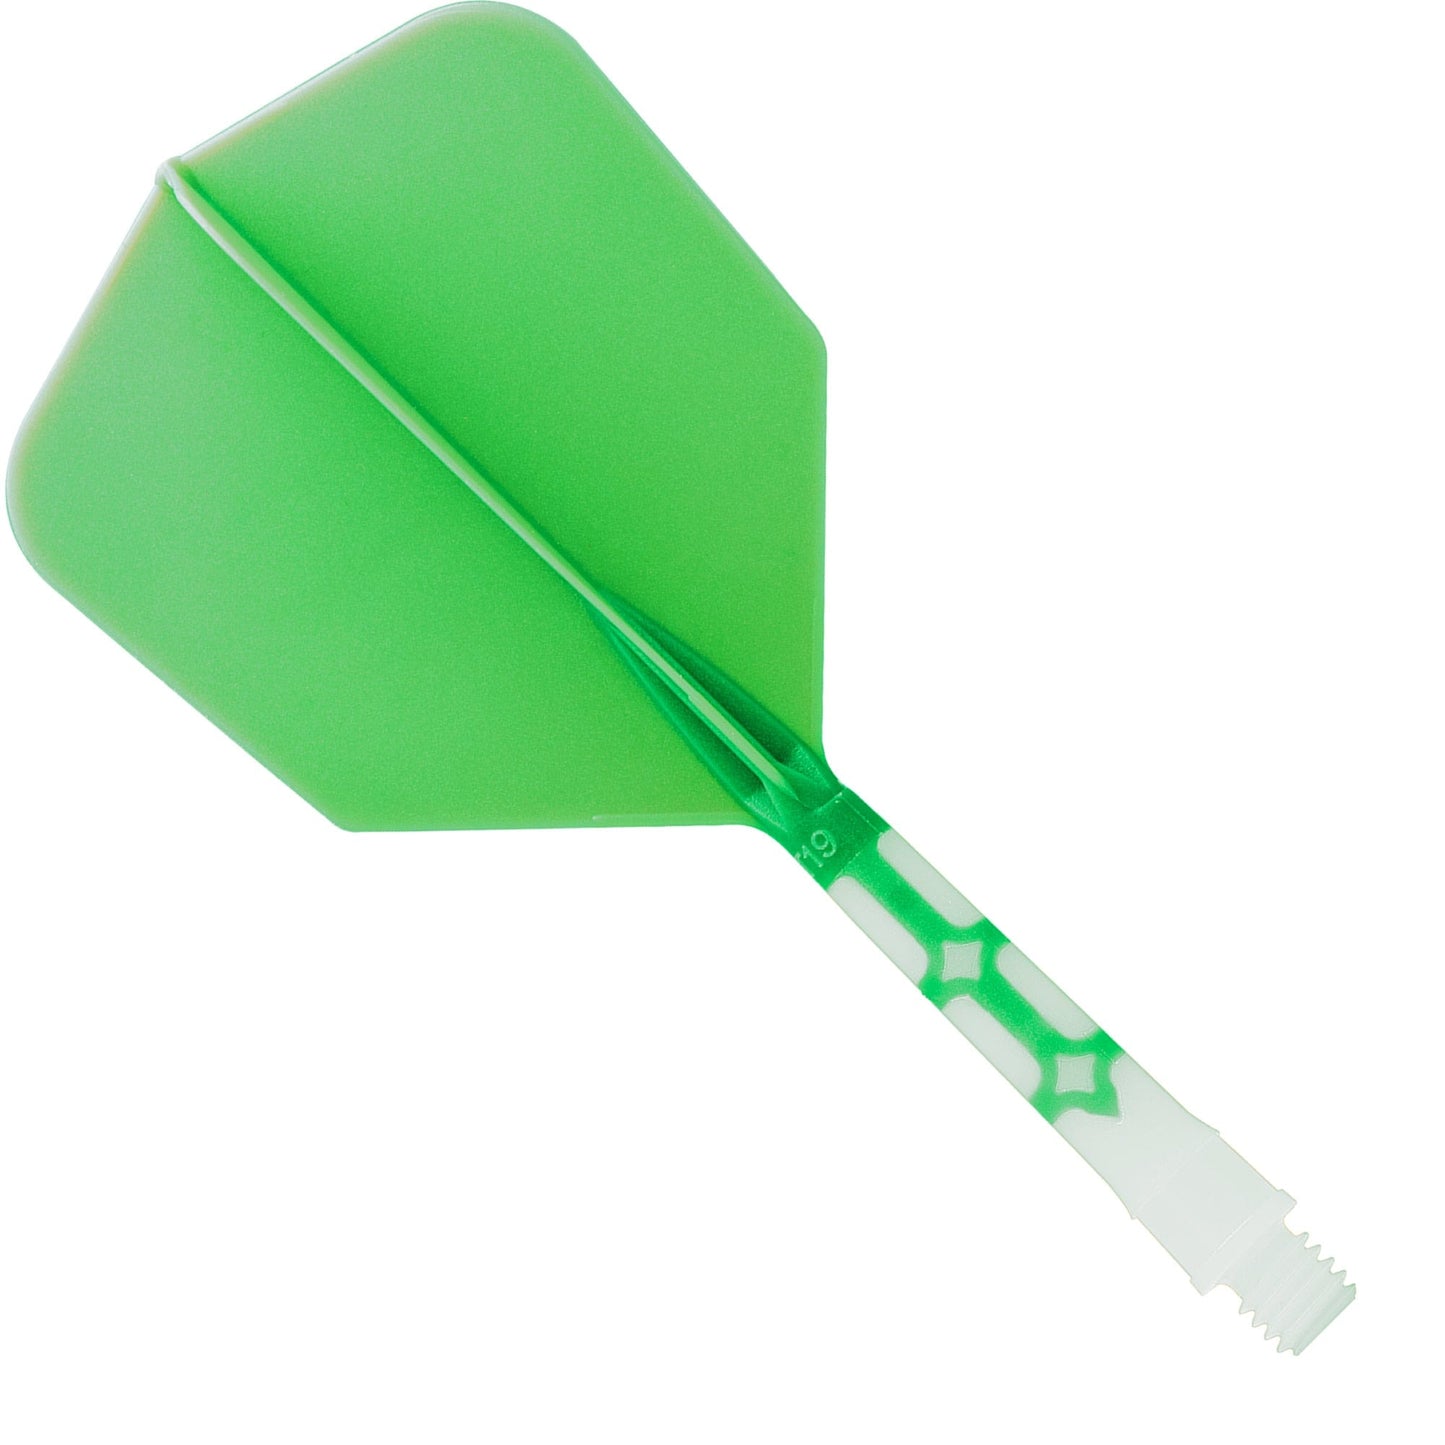 Cuesoul Rost T19 Integrated Dart Shaft and Flights - Big Wing - White with Green Flight Medium